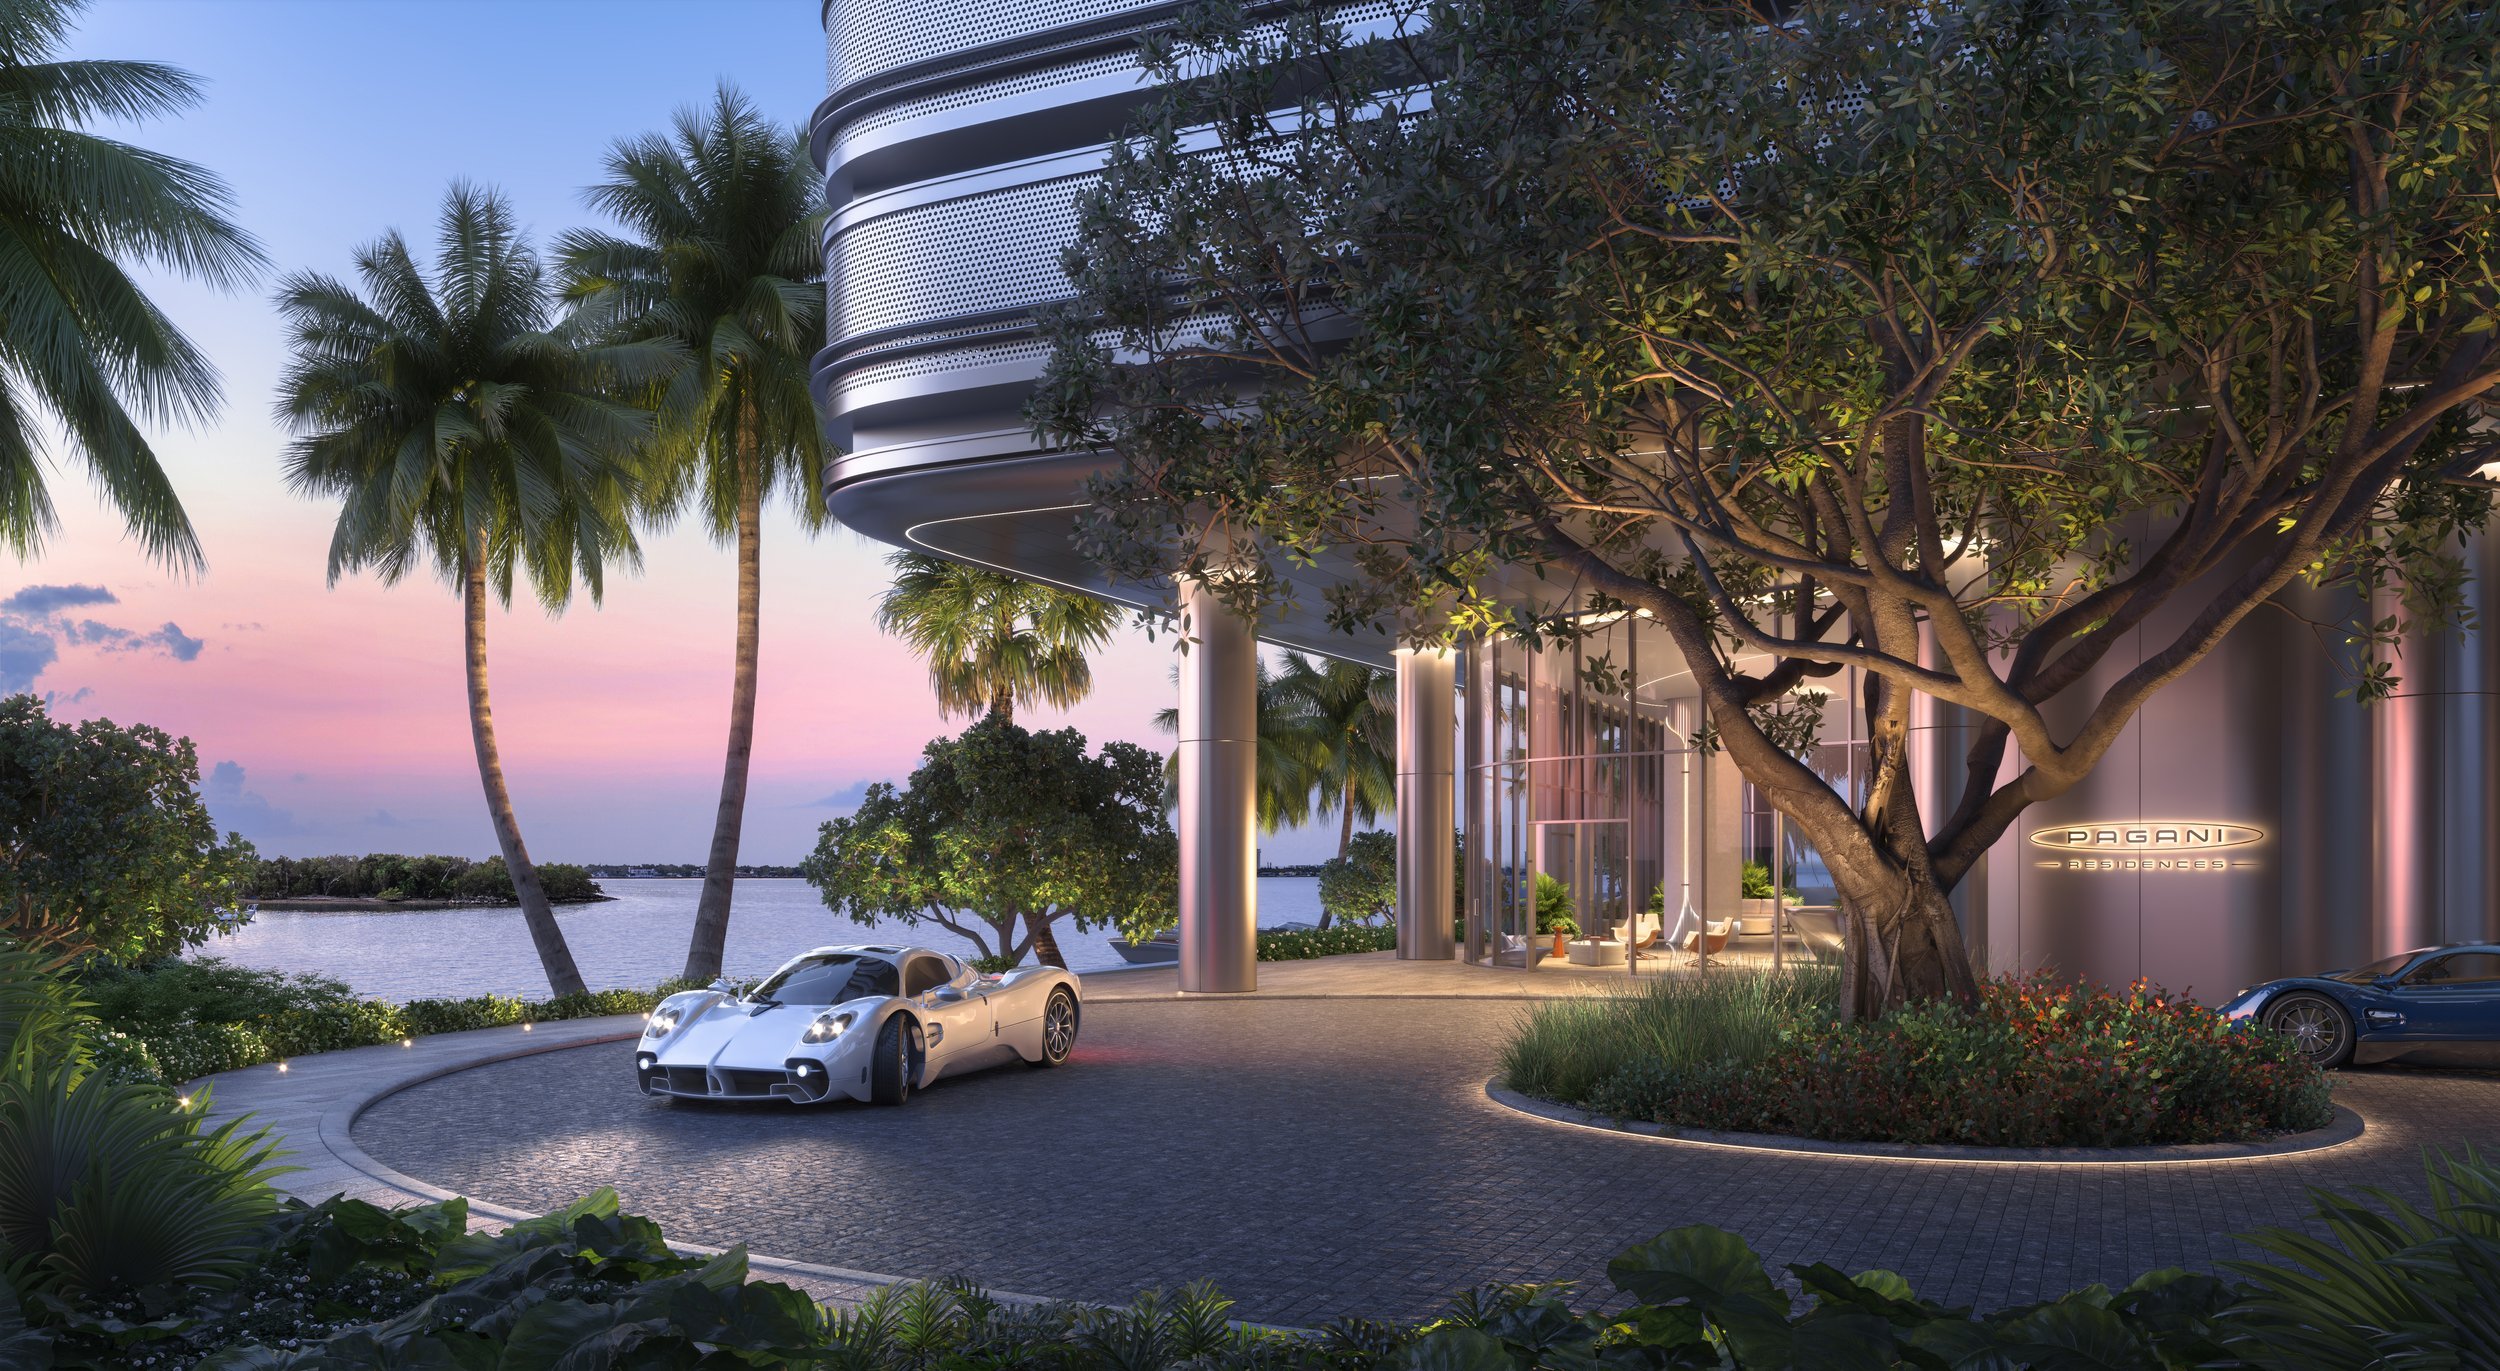 Pagani Residences Reveals First Look At Luxe Amenities on Miami's North Bay Village 443.jpg